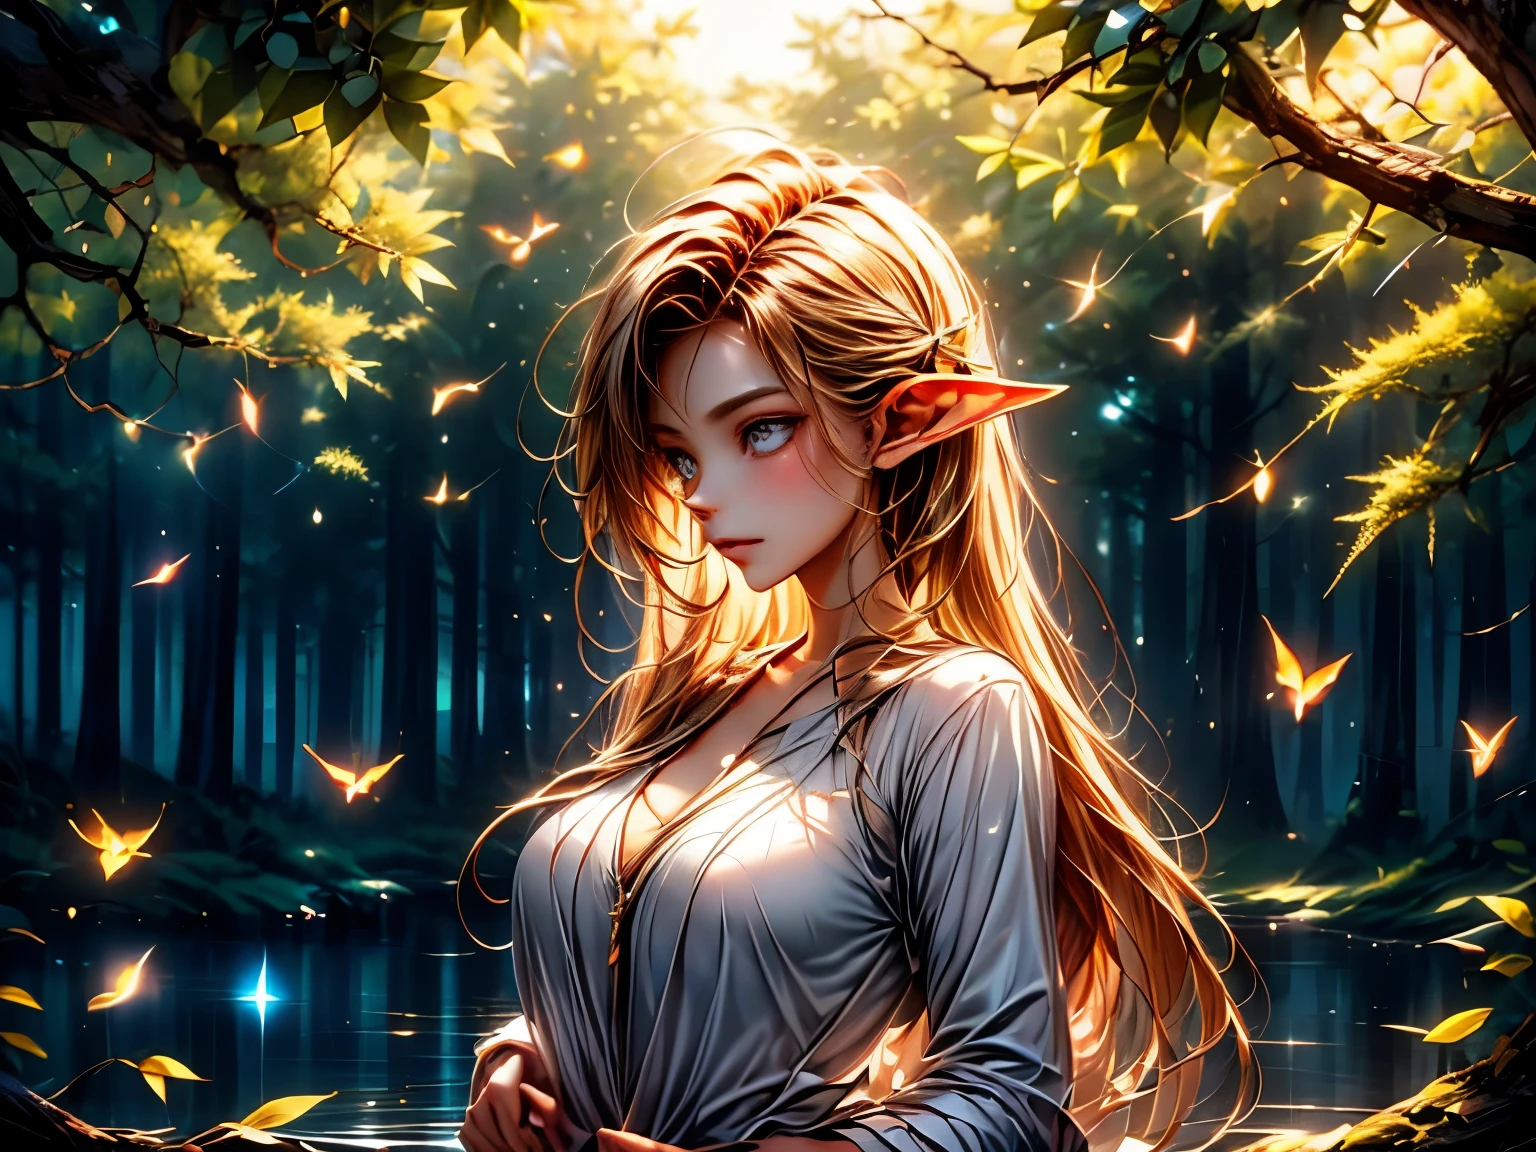 Portrait,elf,standing,by the lake,nature,enchanted,beautiful,serene,peaceful,glorious,ethereal,delicate features,pointed ears,sparkling eyes,graceful,mysterious,flowing hair,sunlight filtering through the trees,reflection on the water,golden hour,soft colors,ethereal glow,lush vegetation,magical atmosphere,harmony with nature,solitude,gently swaying leaves,silhouette,dappled light,tranquil,serenity,captivating gaze,fairy-like,immersed in the moment,whispering breeze,gentle ripples,calm and stillness,one with the surroundings